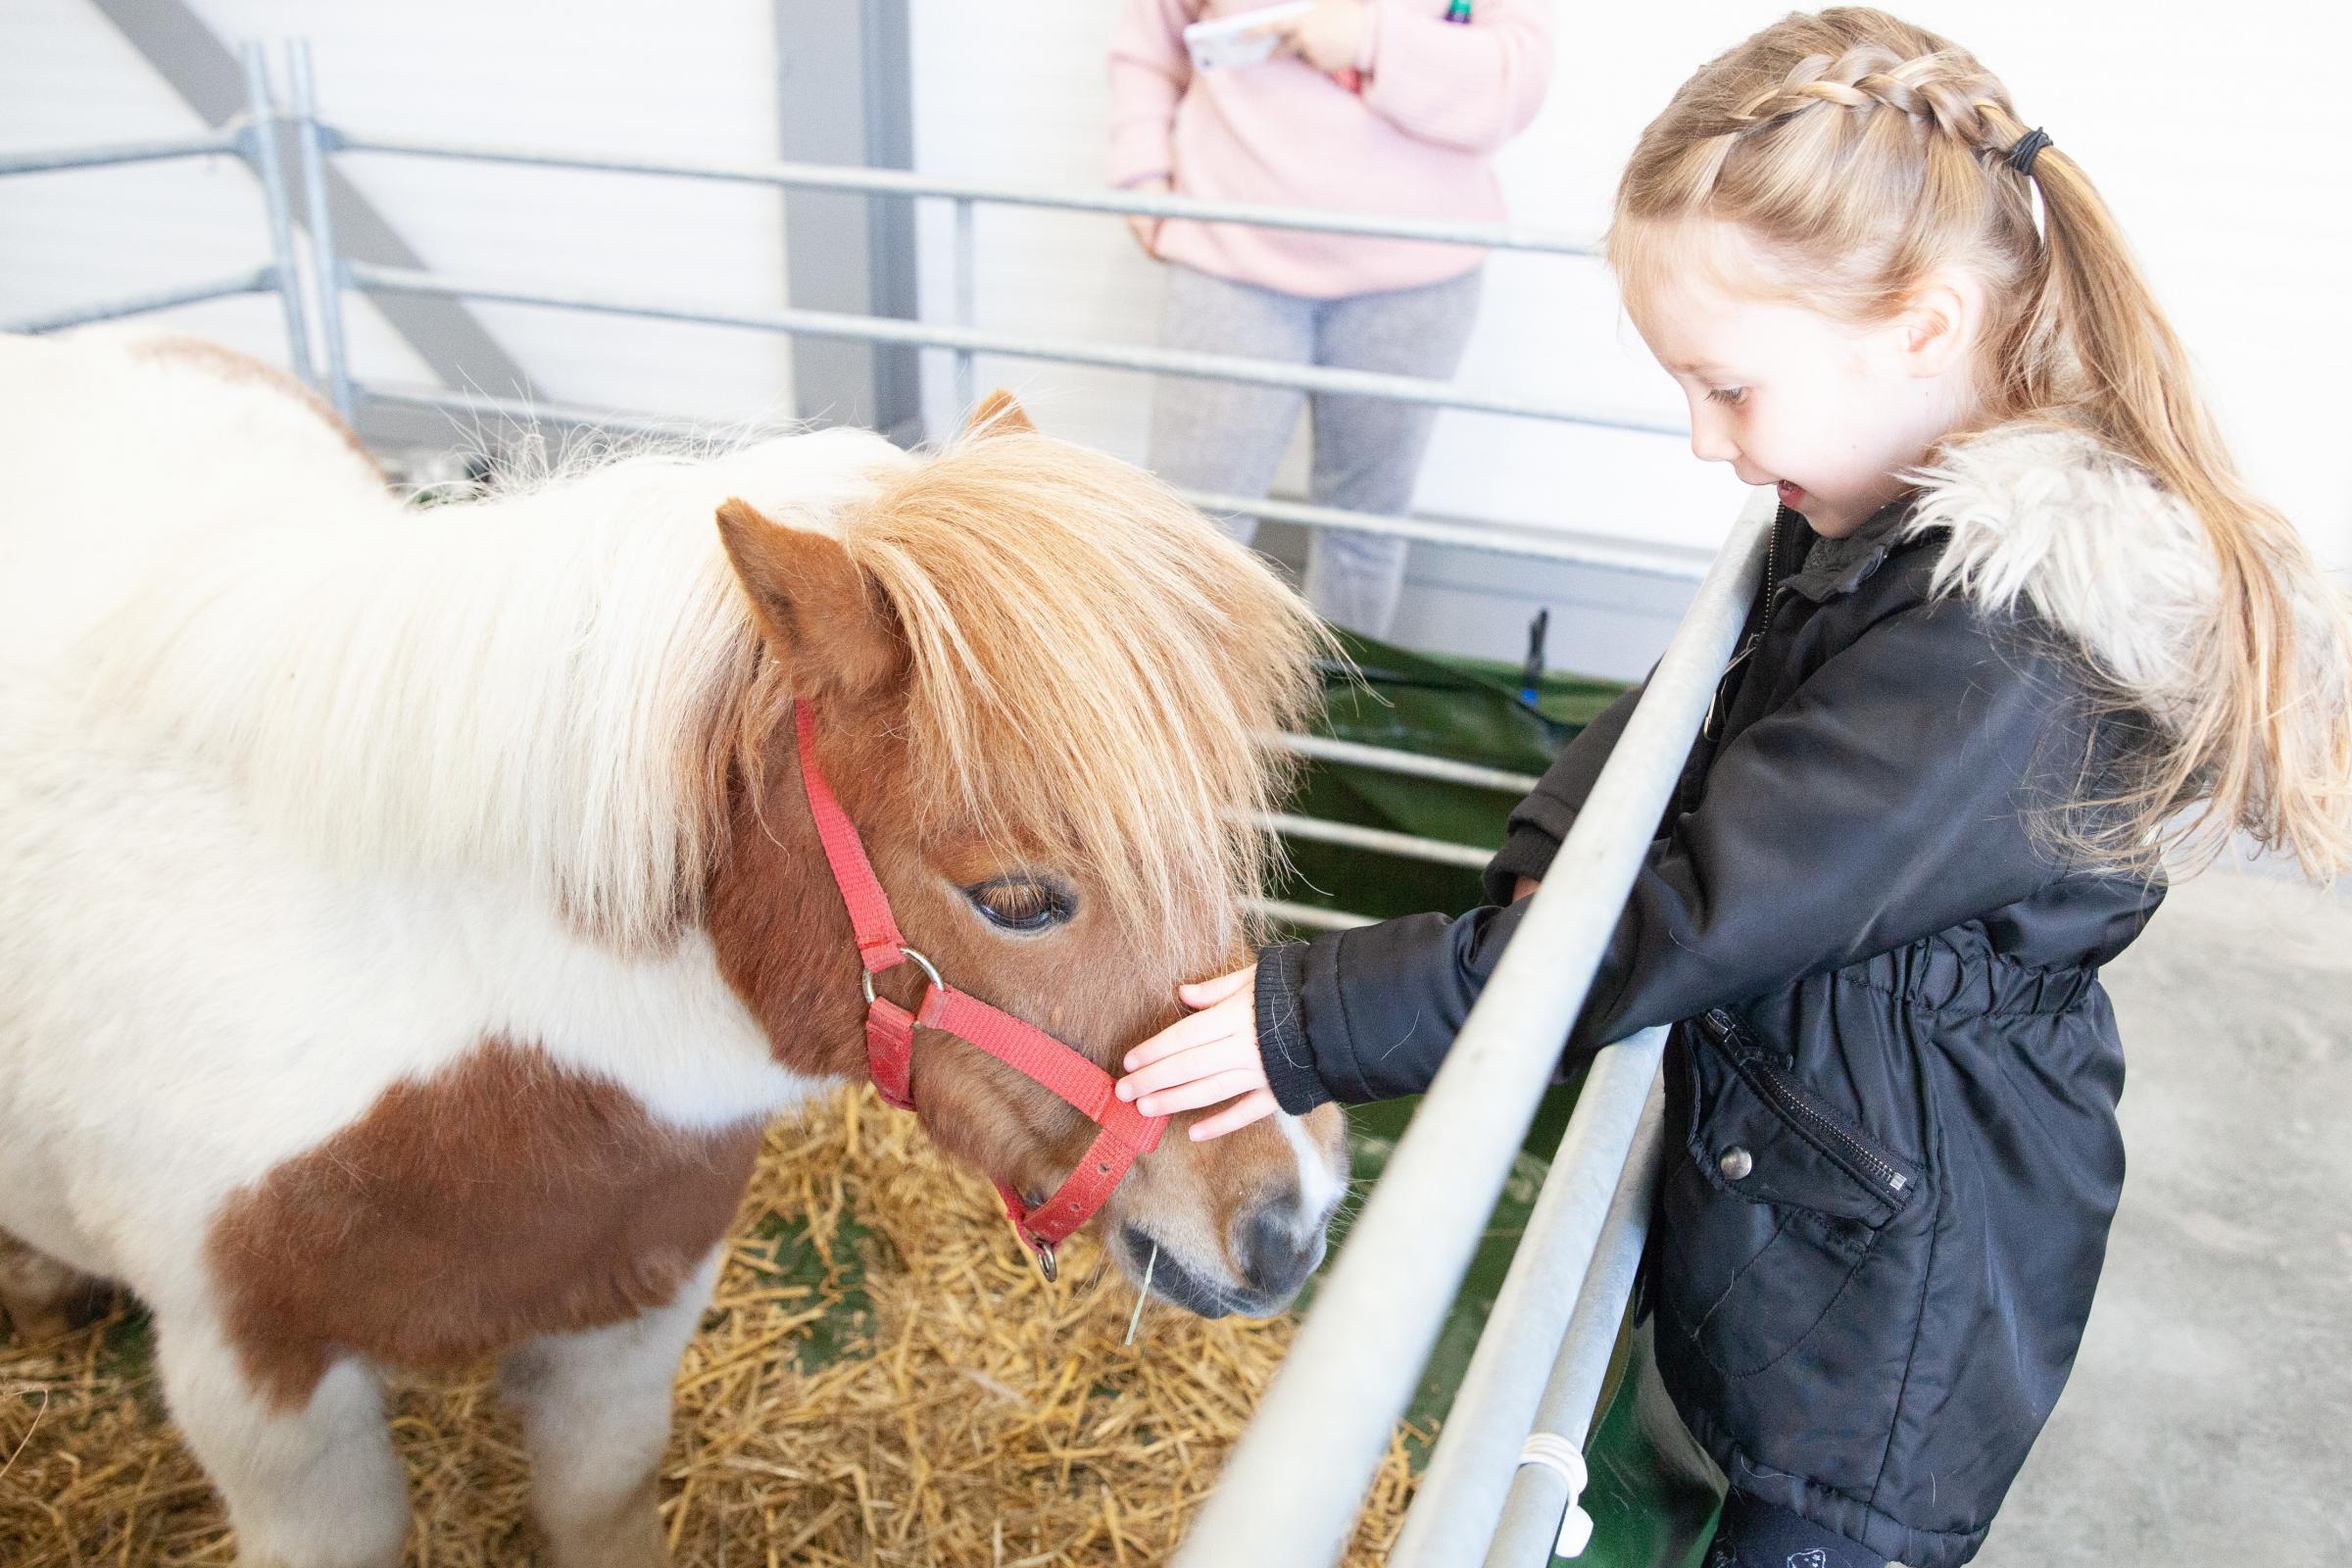 'I didn't know mummy had these at work' - business park holds Easter farm day